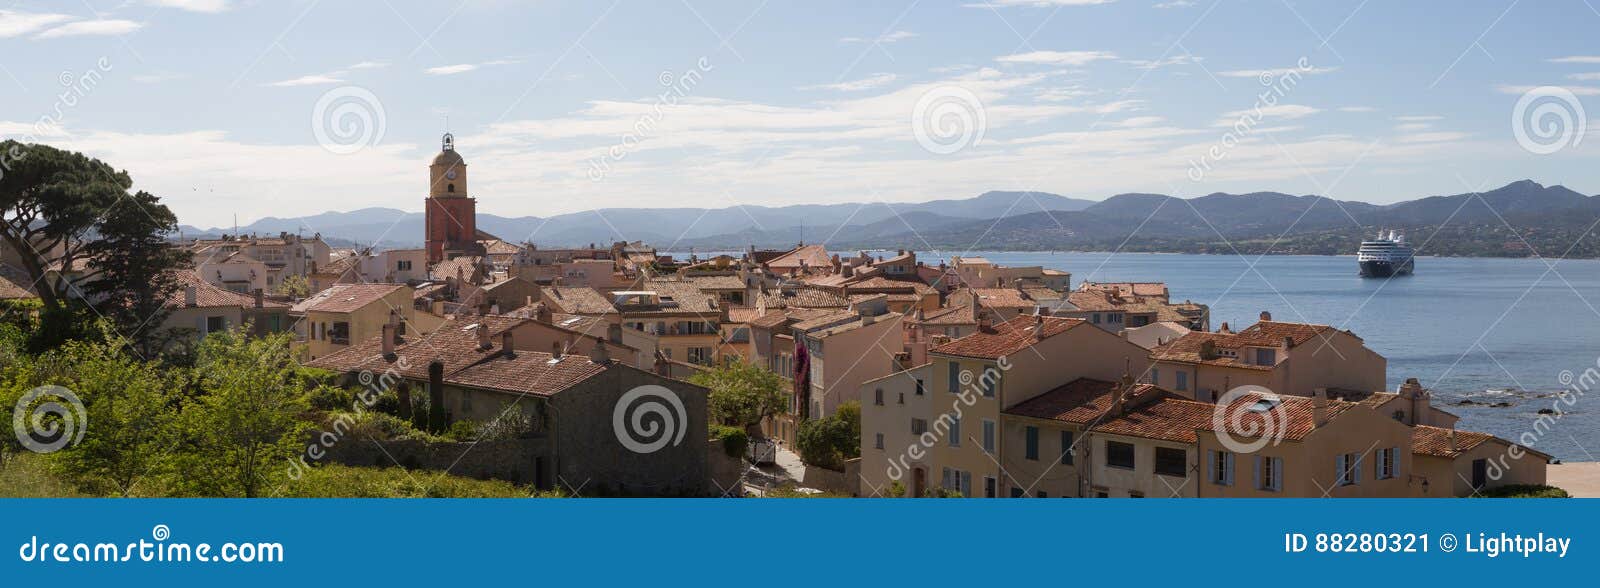 Panoramic view on Saint Tropez France and its bay. A cruise ship is anchored in the bay.